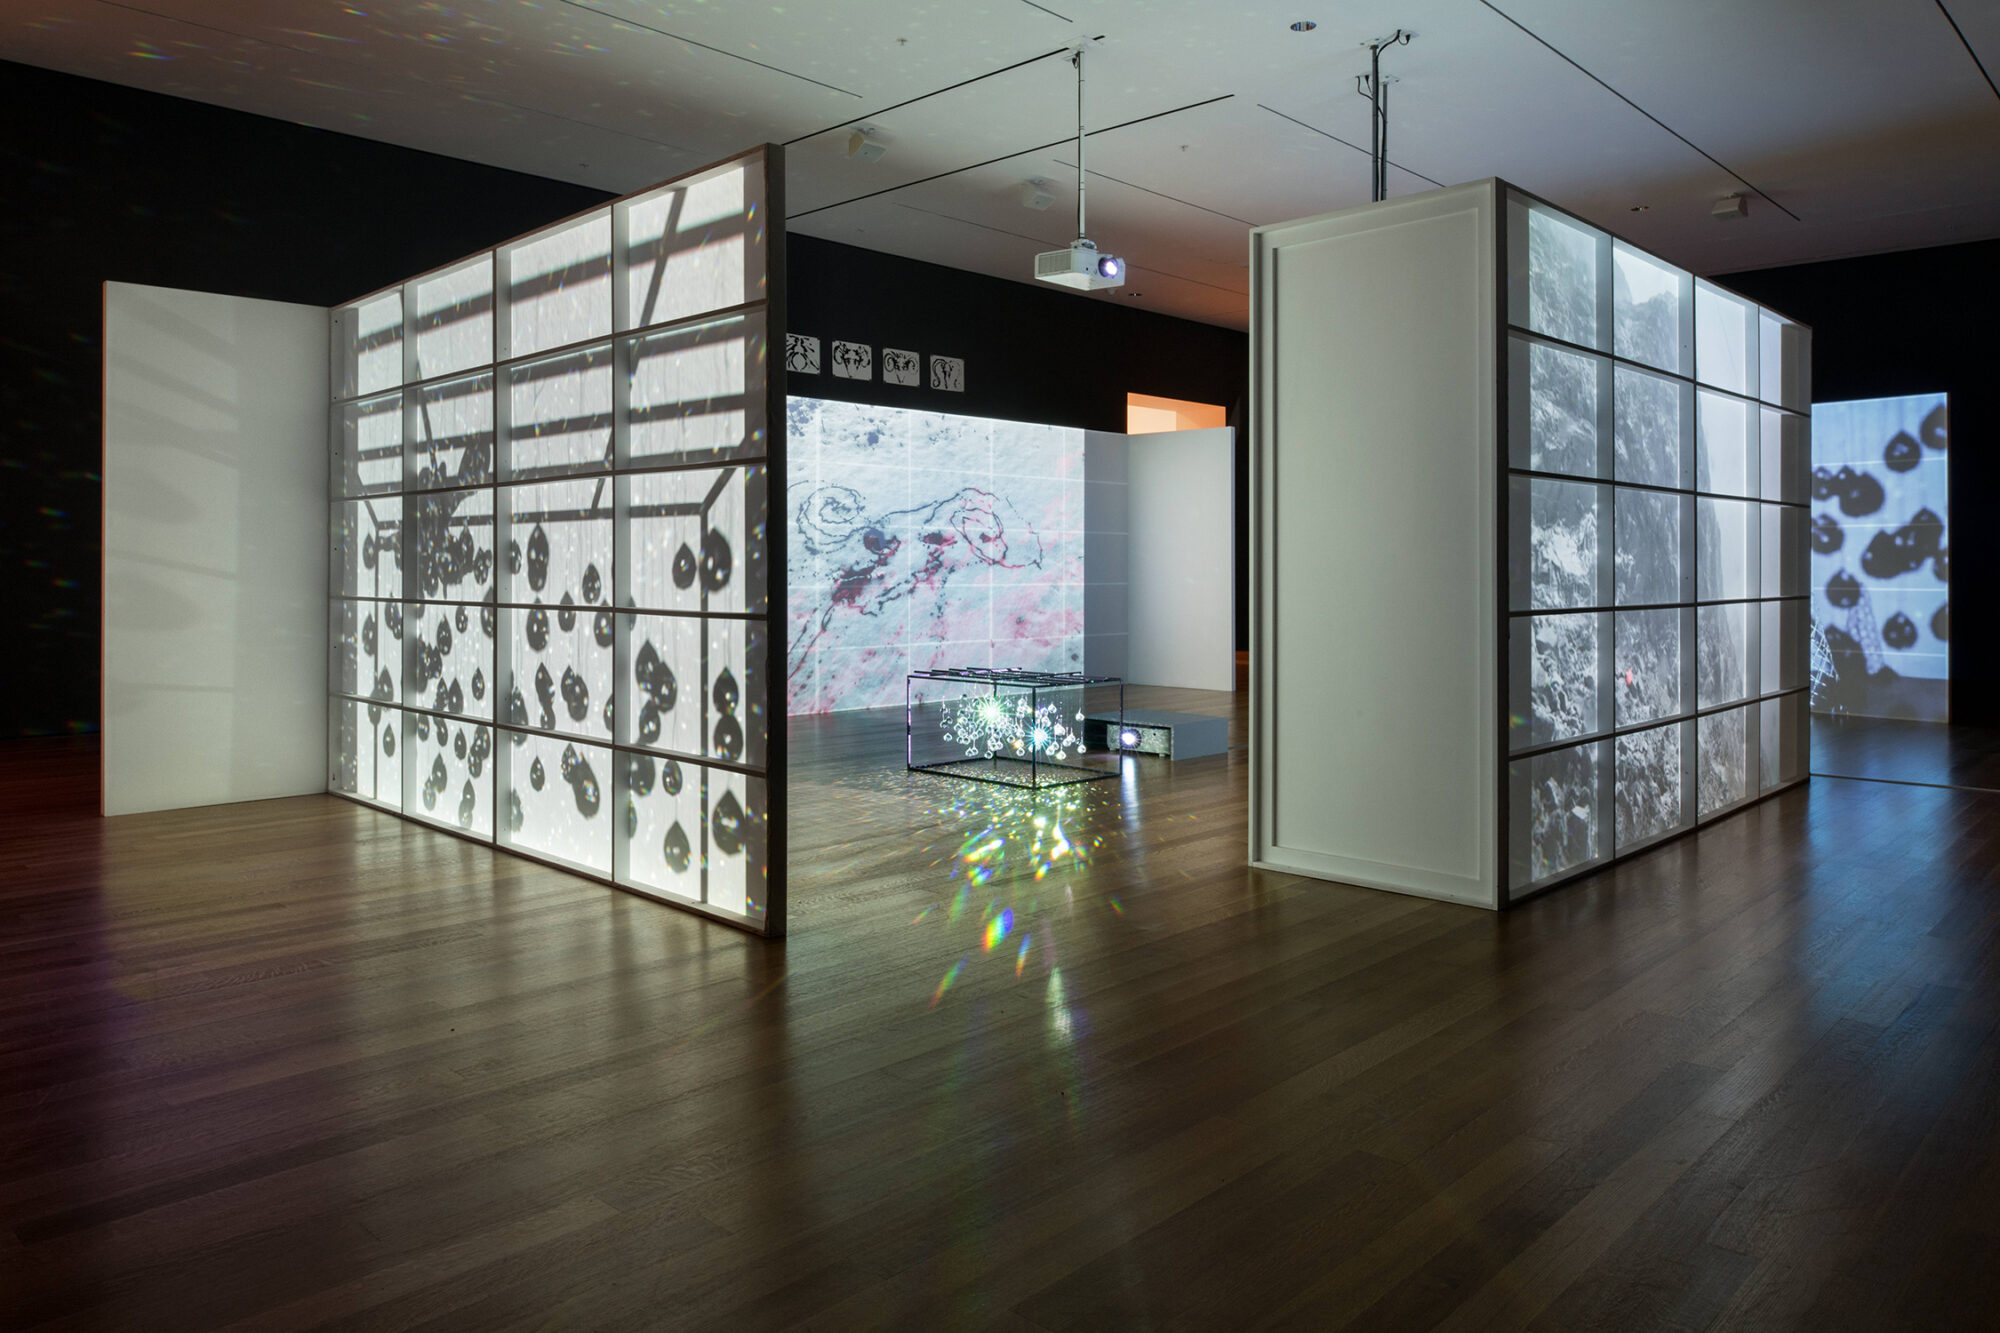 An art installation with Japanese screens, video projectors and crystals